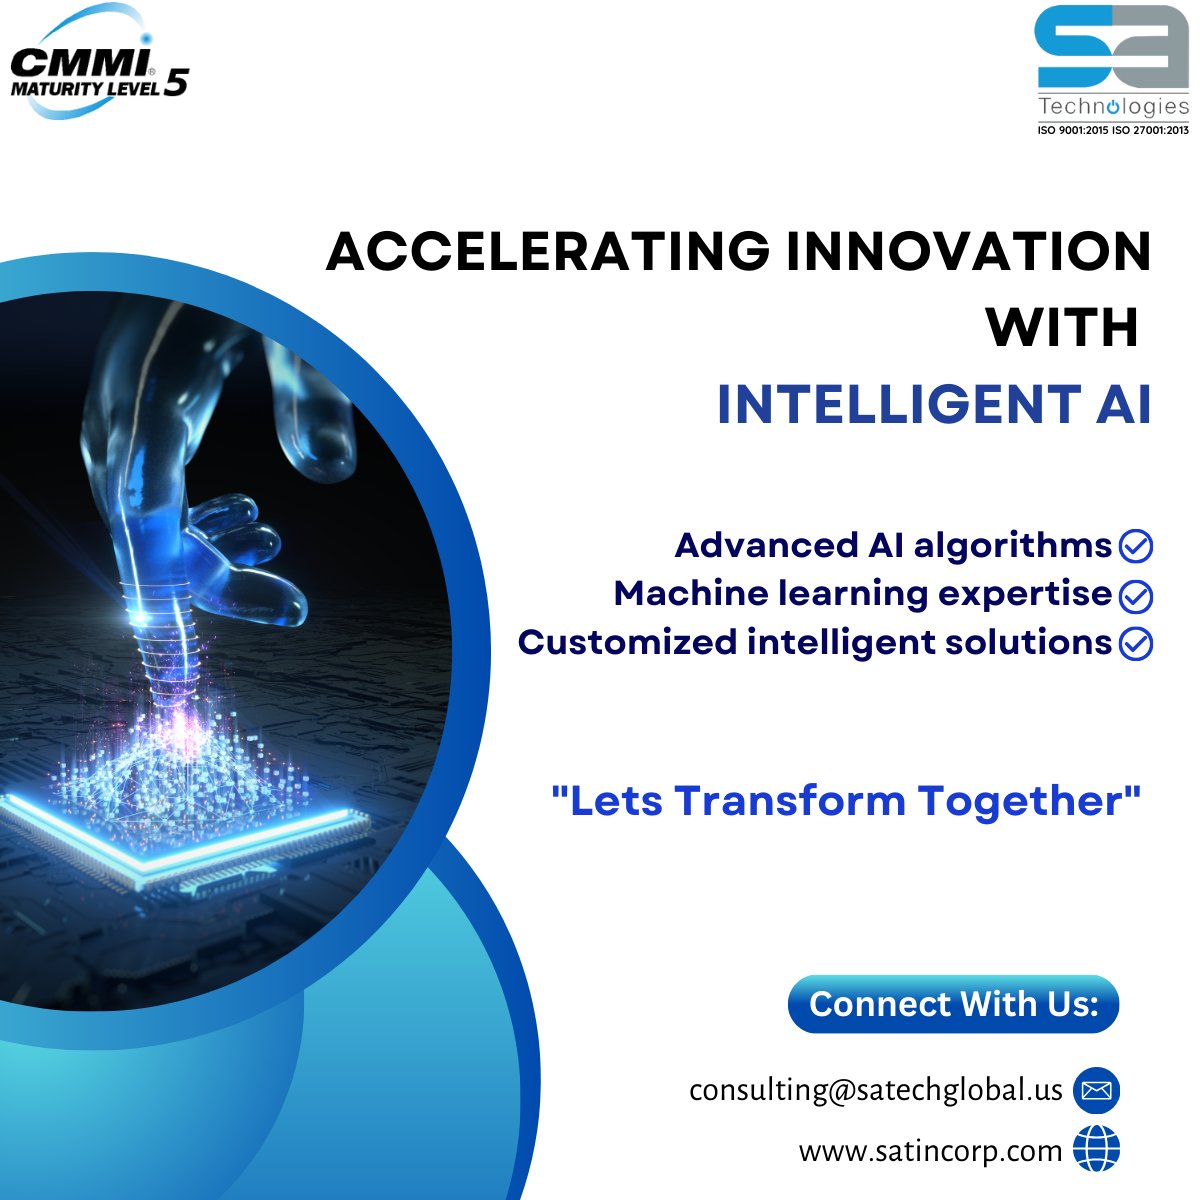 Power your progress with the brilliance of AI – where every algorithm is a step towards innovation. 

Visit: satincorp.com 

#intelligentAI #advancedalgorithms #machinelearning #smartsolutions #futureisnow #AItransformation #techprogress #AIexperts #SATechnologies